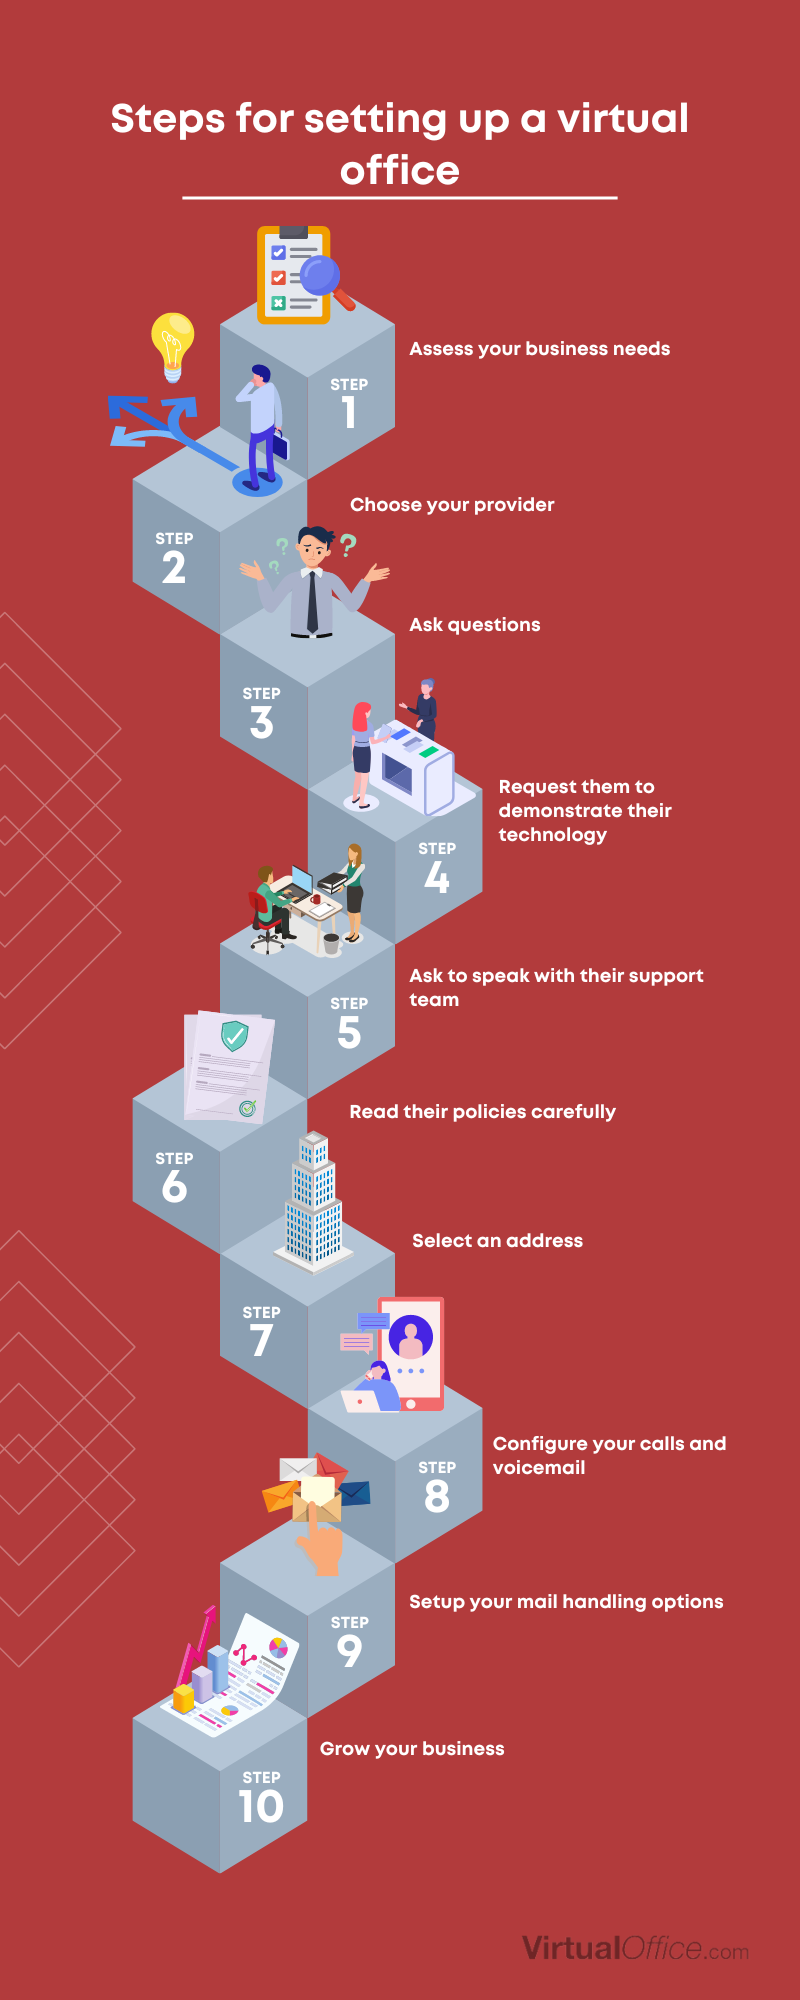 An infographic which displays the steps on setting up a virtual office for business.